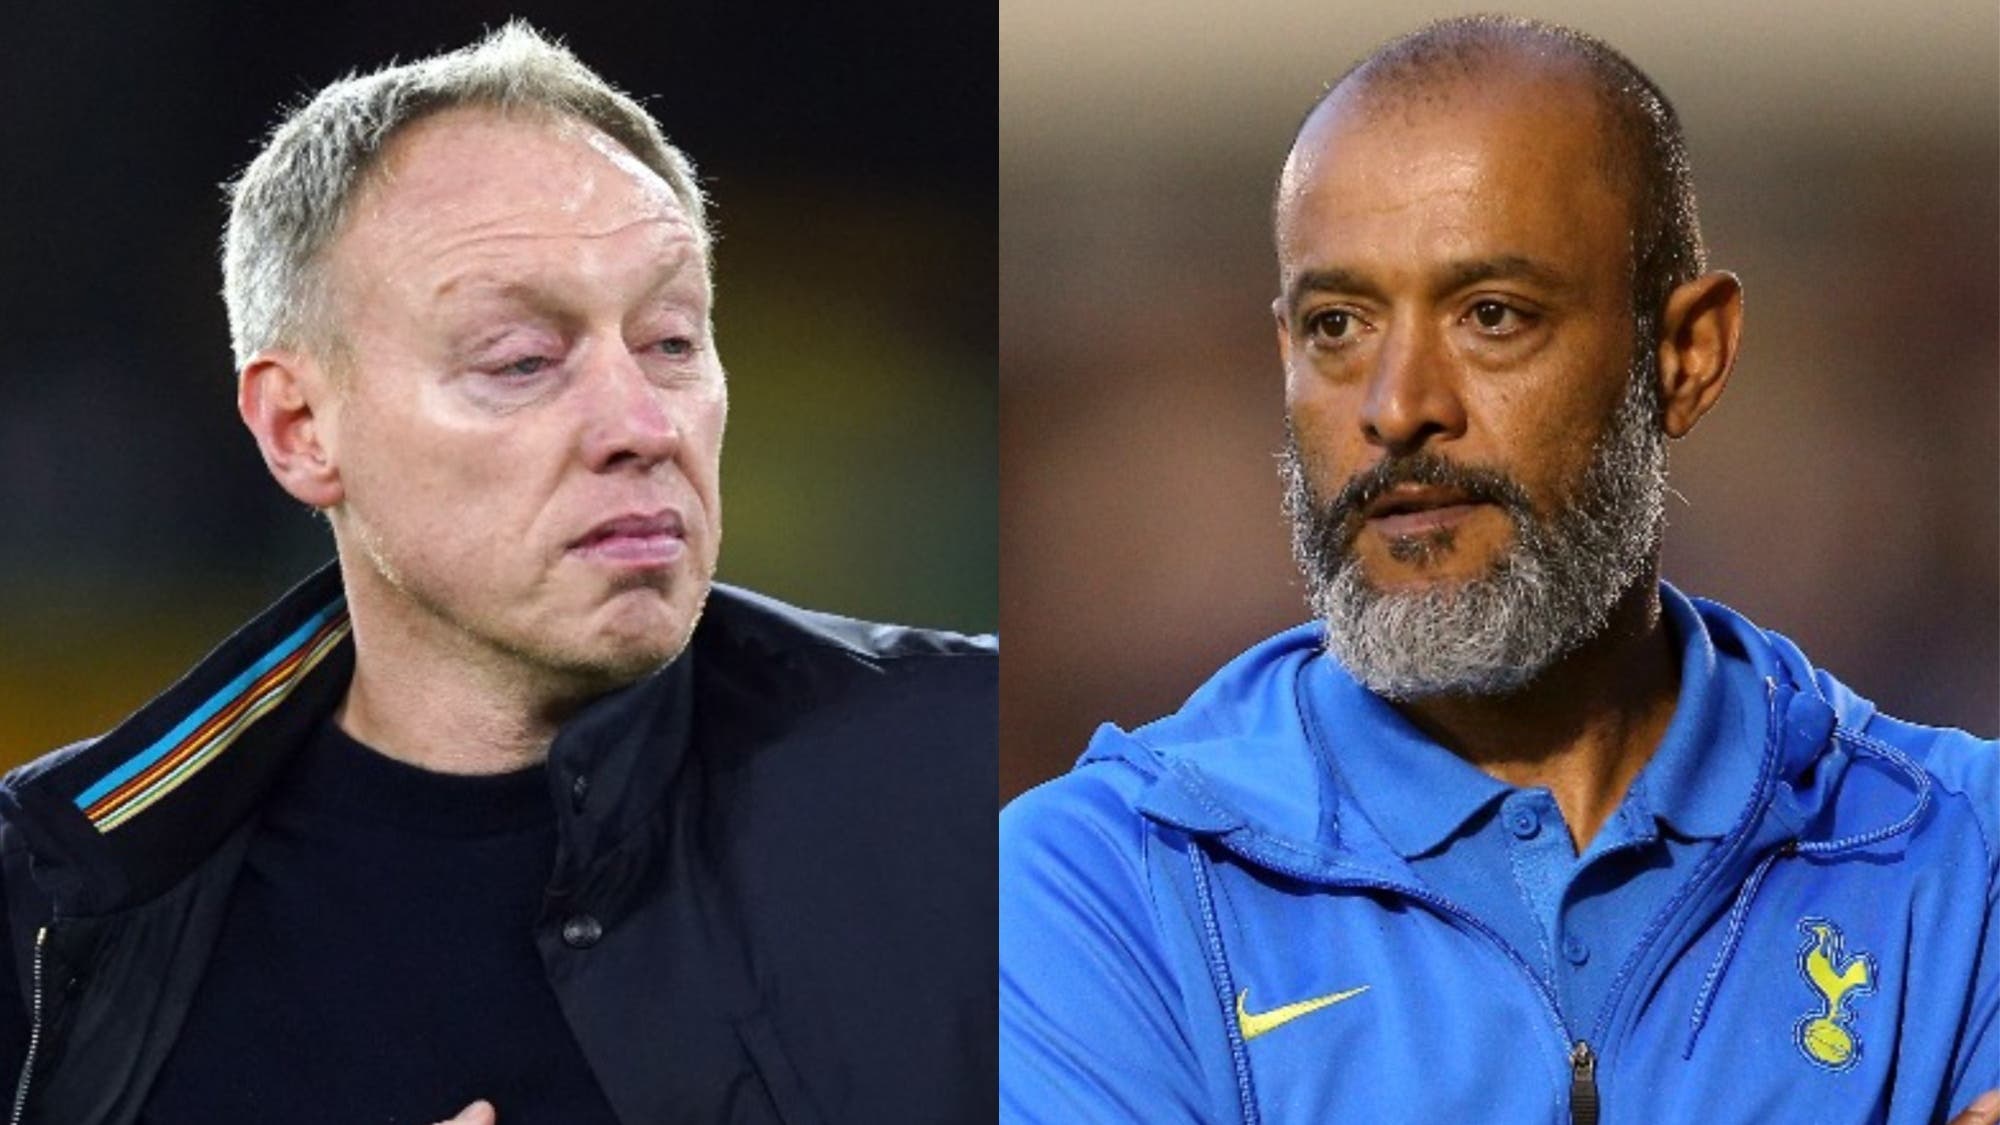 Steve Cooper’s future in doubt after Forest hold talks with Nuno Espirito Santo